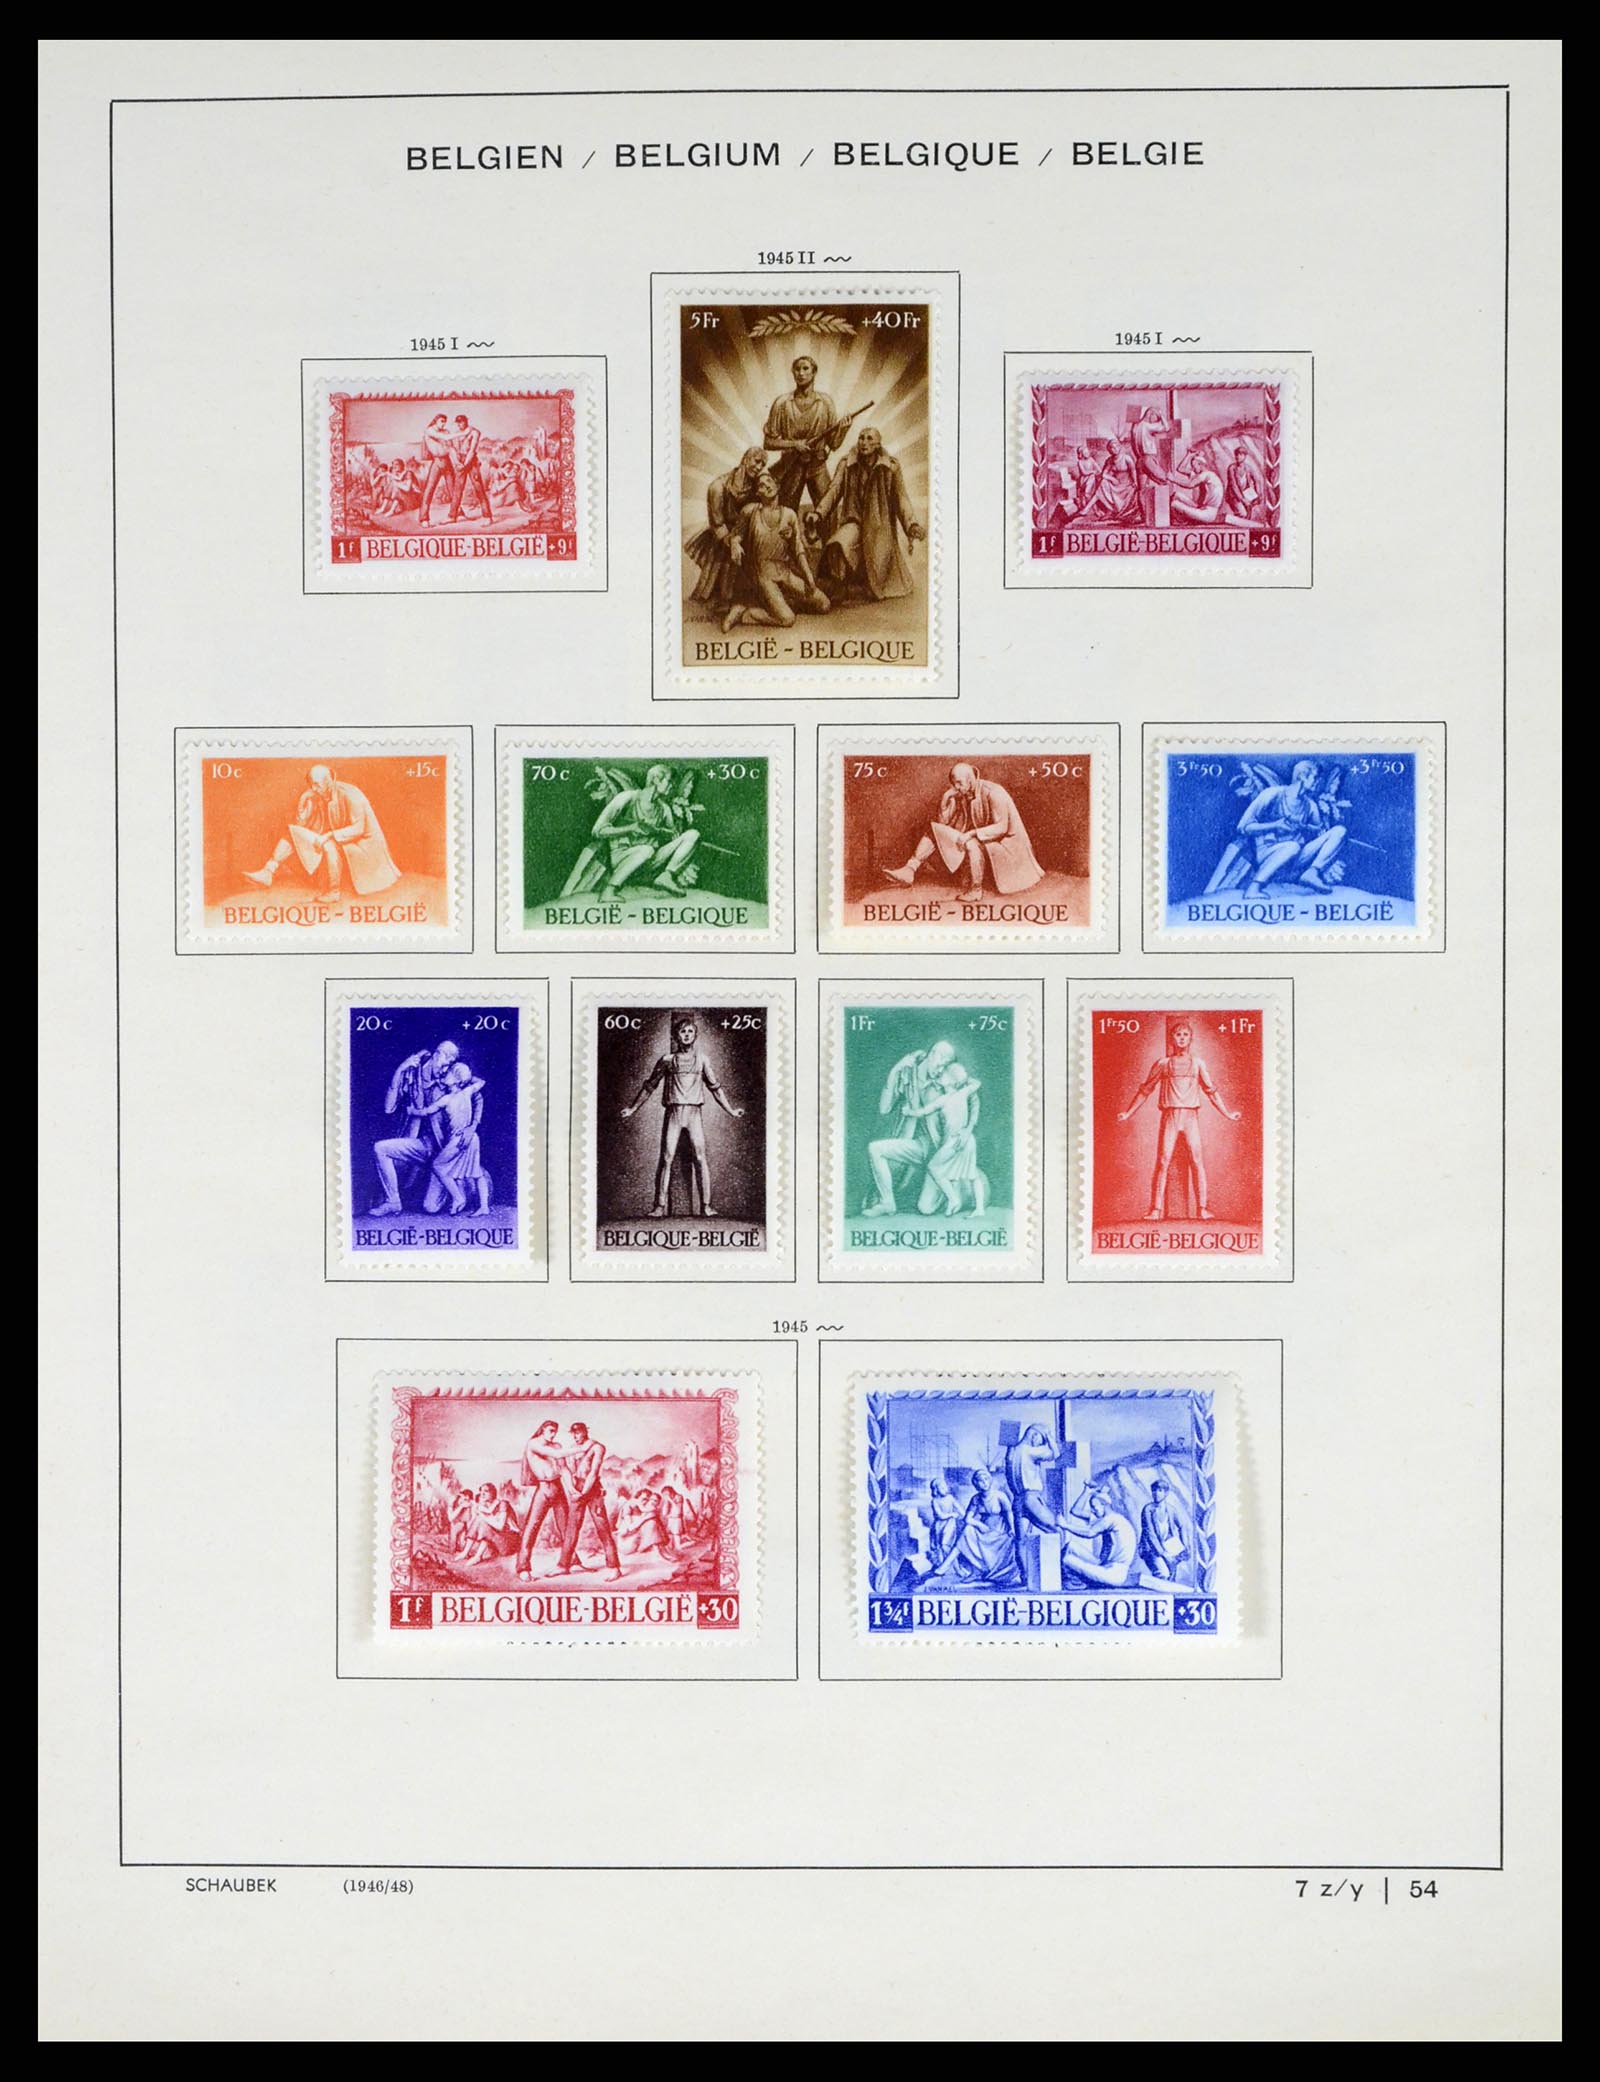 37595 061 - Stamp collection 37595 Super collection Belgium 1849-2015!